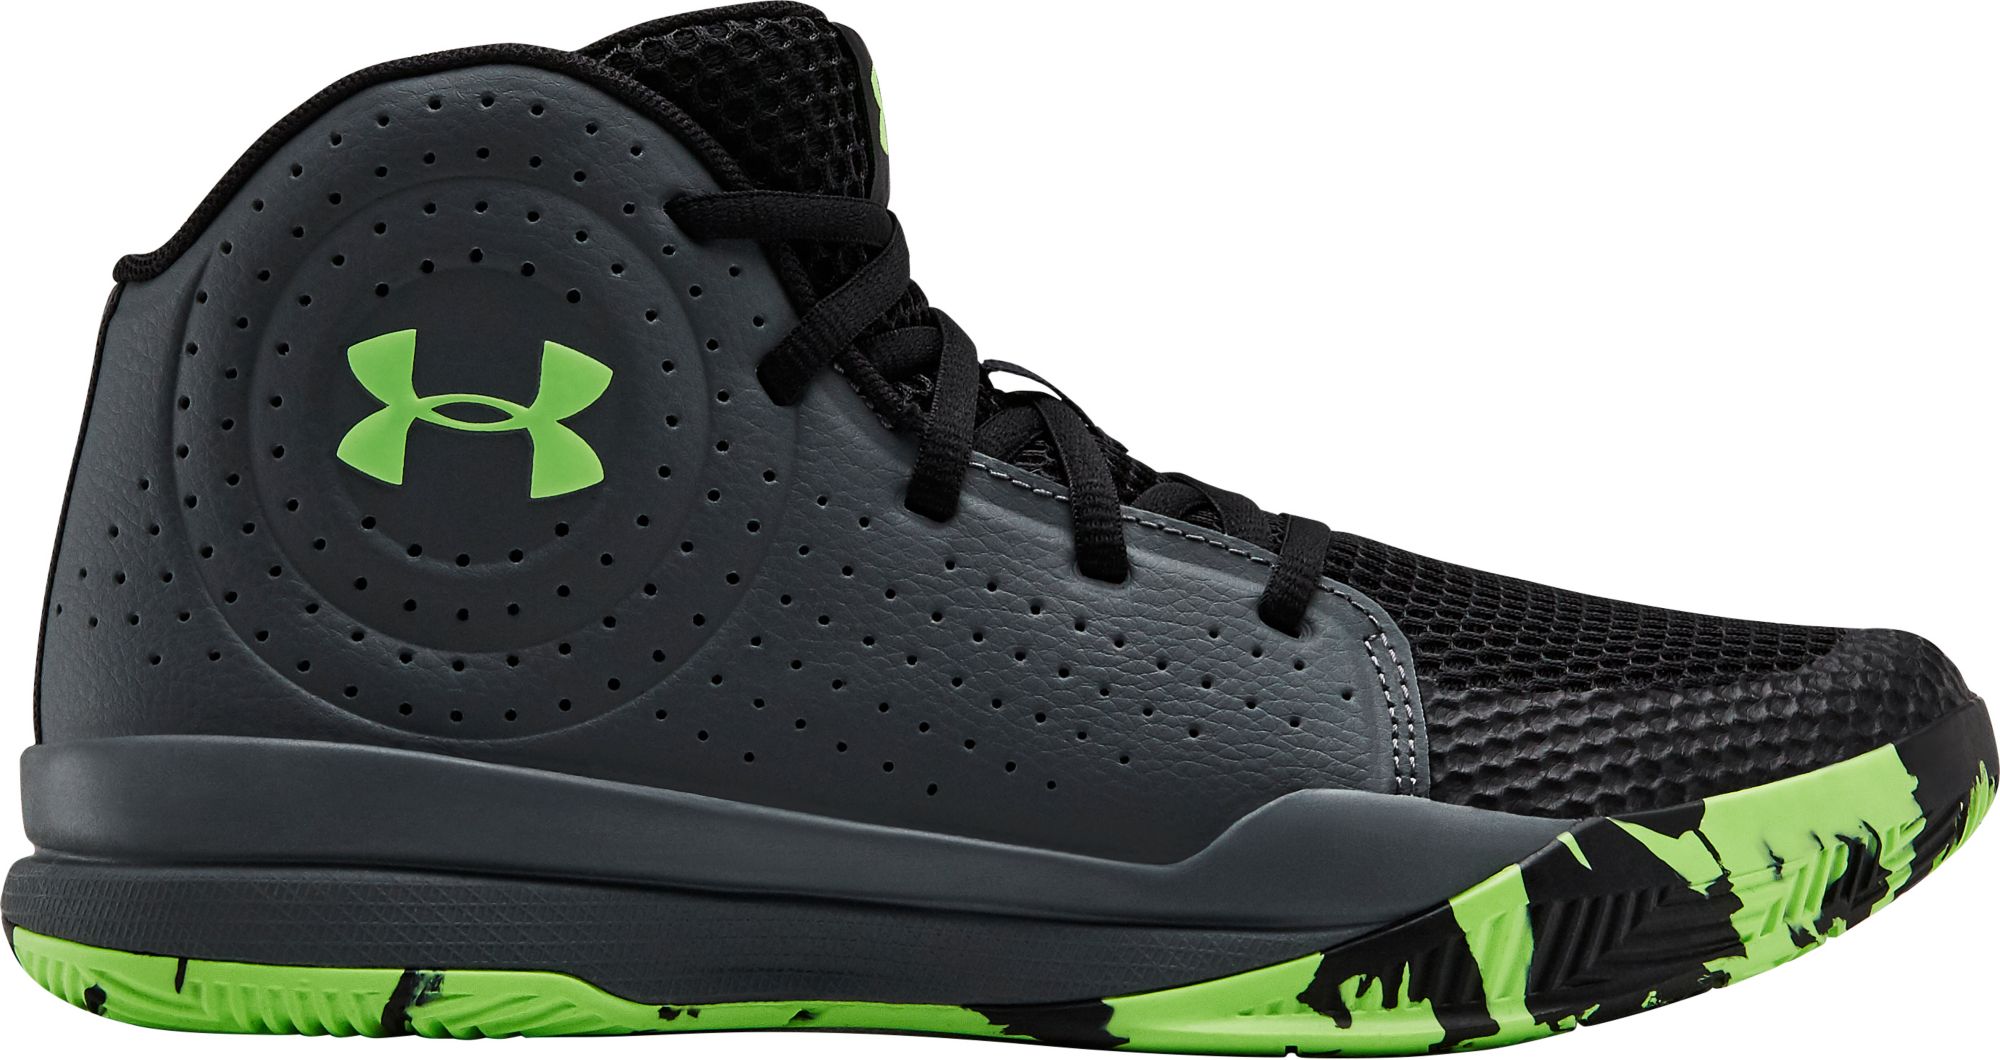 Under Armour Kids' Grade School Jet 2019 Basketball Shoes - image 1 of 6